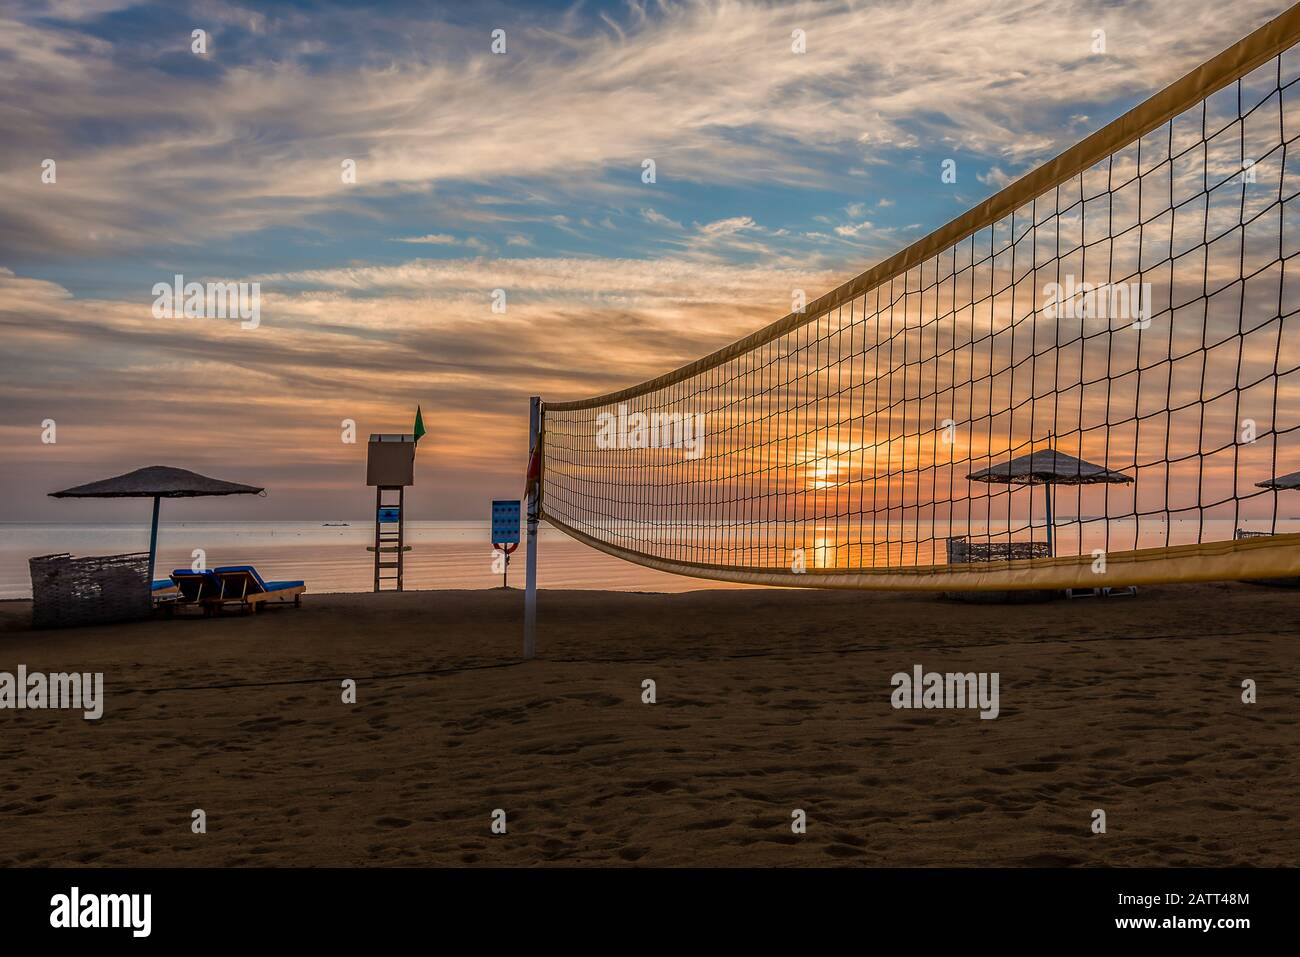 volleyball net and sunbeds on a sandy beach at sunset in the Red Sea, el Gouna, Egypt, January 16, 2020 Stock Photo